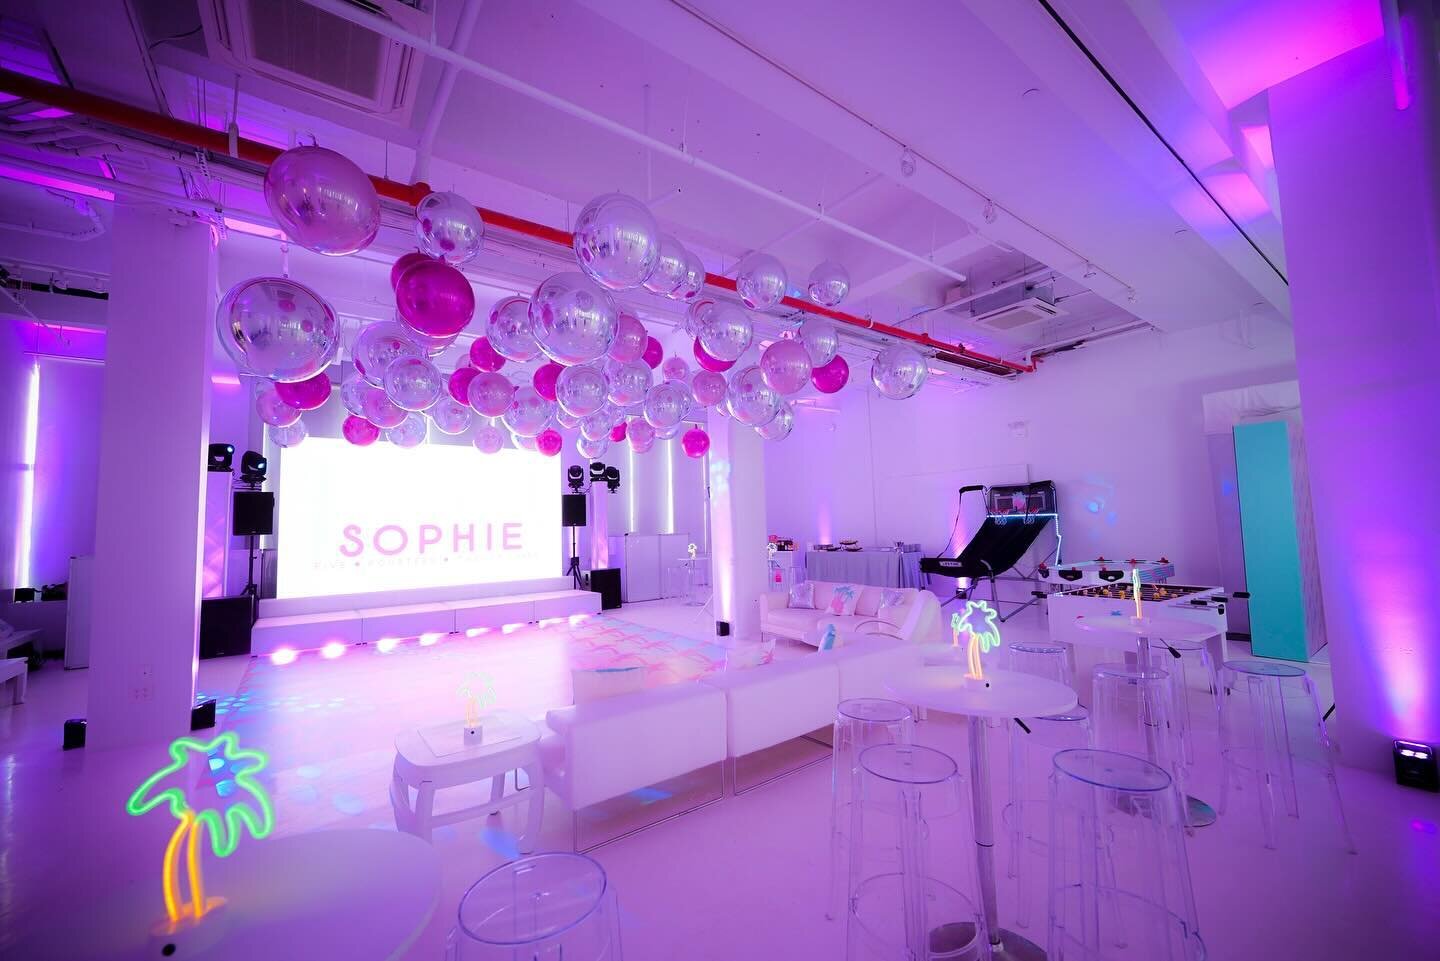 Have it your way @location05 

Event Planning: @rubymaxevents 
Entertainment, lighting and production: @totalentertainmentnyc
Graphics: @rcreativeinc
Catering: @zamicaterers
Swag: @partyswagdesigns
Photography: @starrphotographynyc
Ceiling treatment: